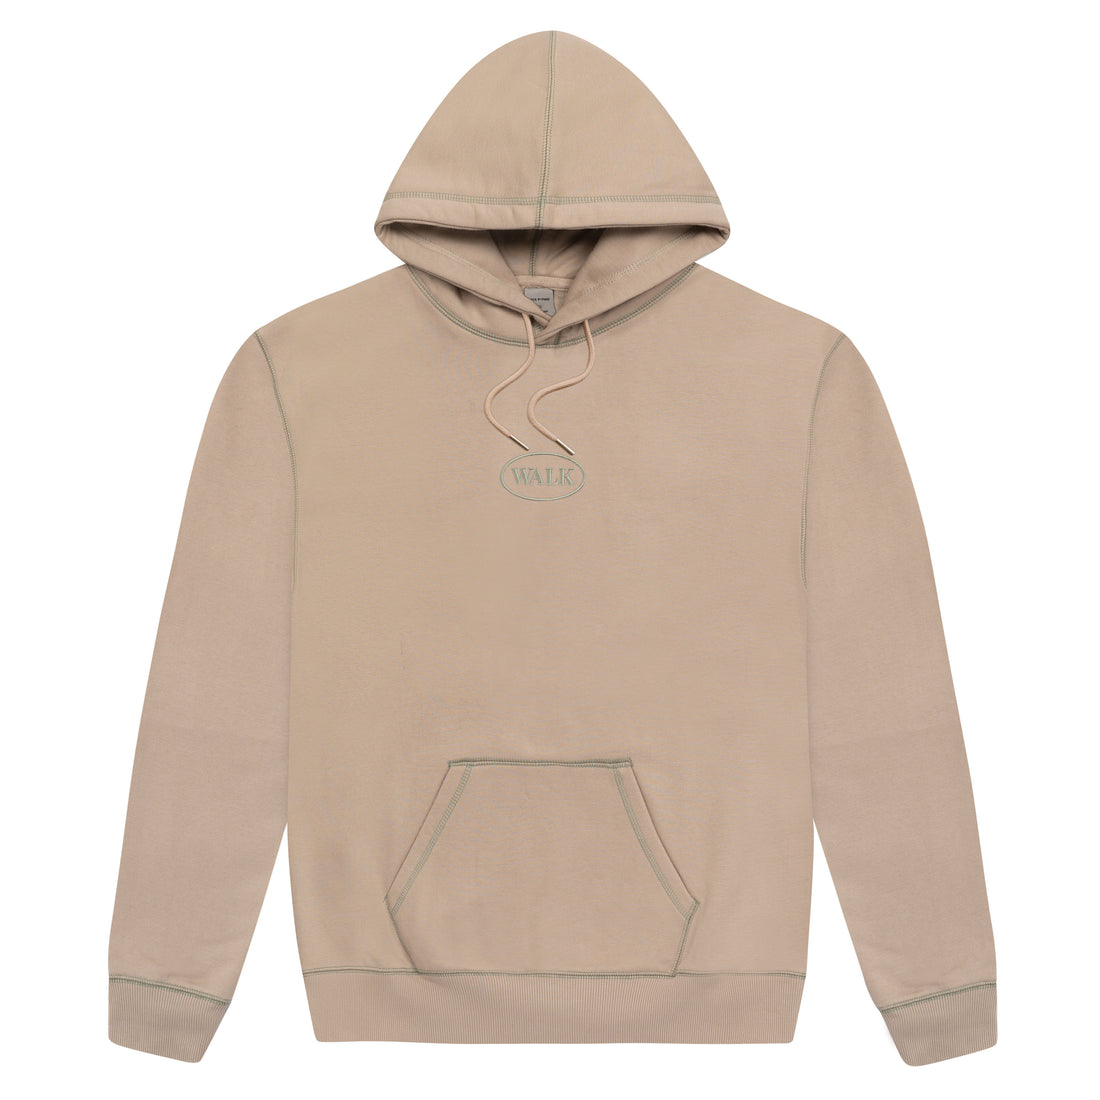 THE TAUPE HOODIE